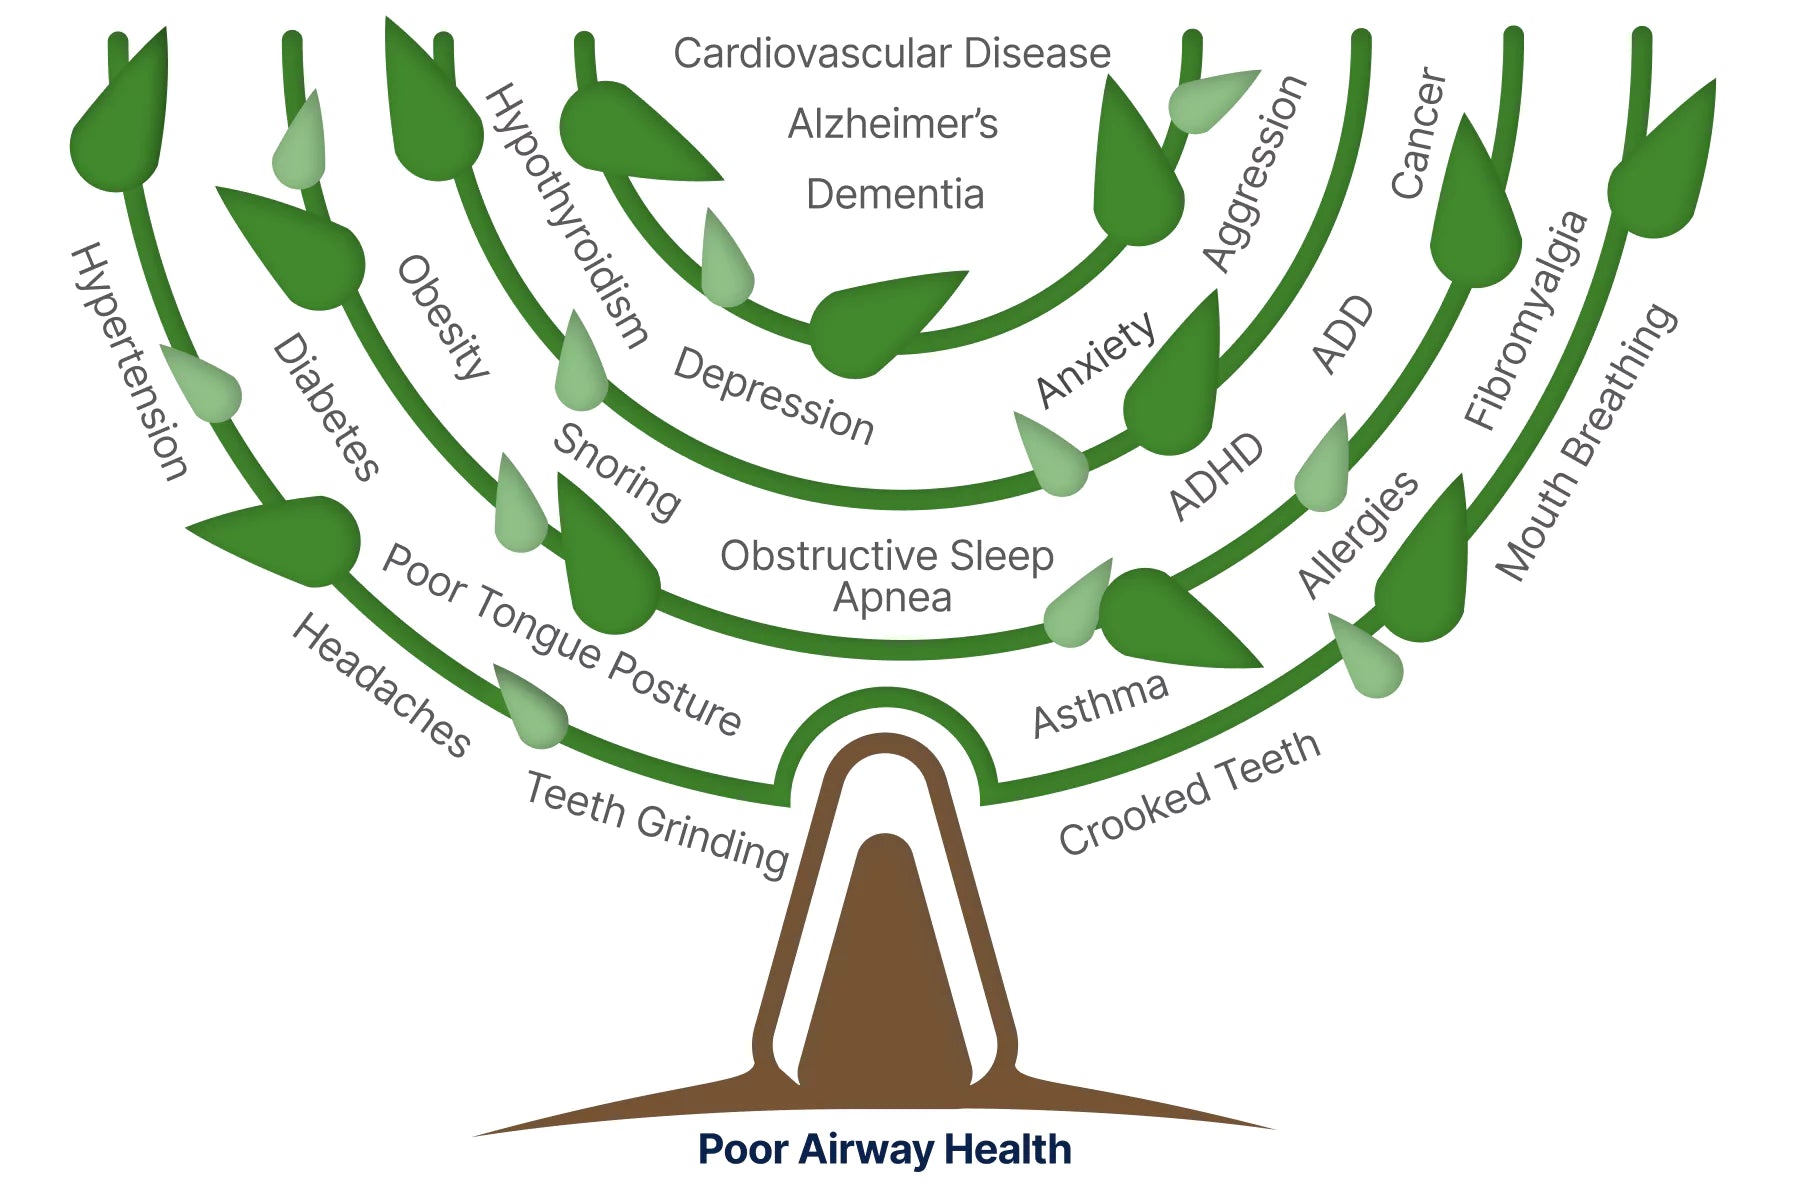 Why airway health matters root cause